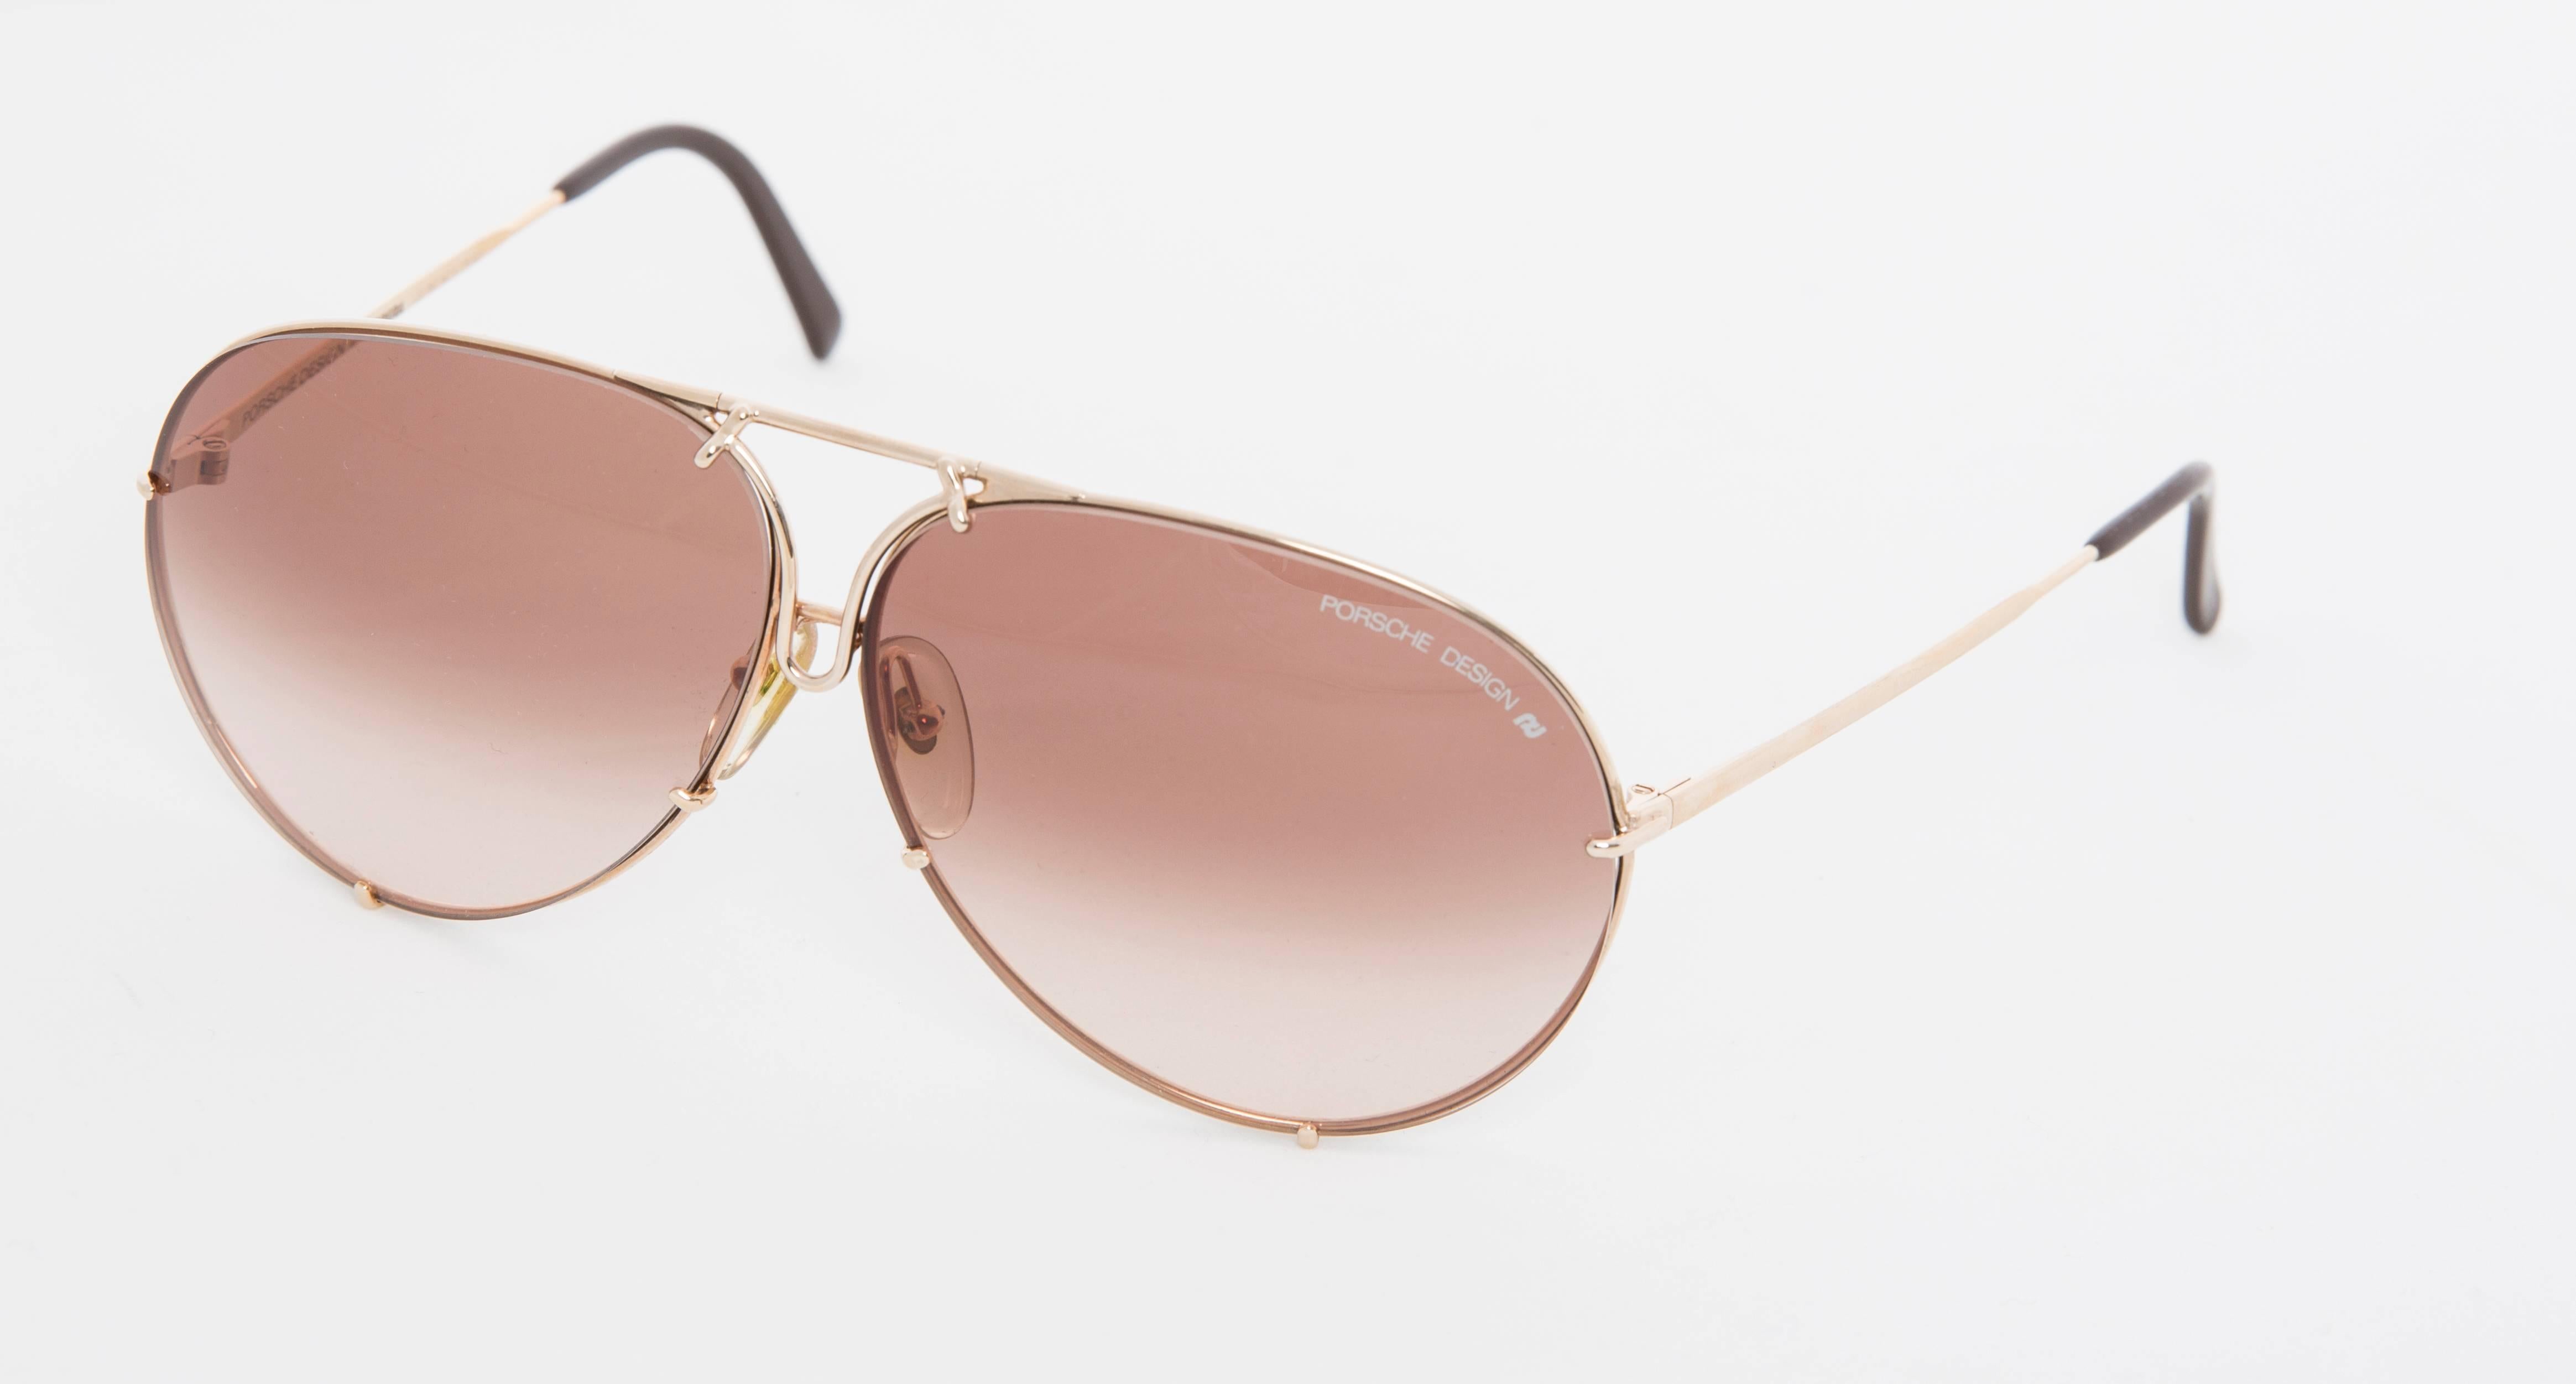 Porsche Design by Carrera model 5621, circa 1980's aviator sunglasses. The classic sunglasses are in gold toned rims, with gradient brown lens. The hard case contains the additional green lenses in a fitted compartment.

6.0